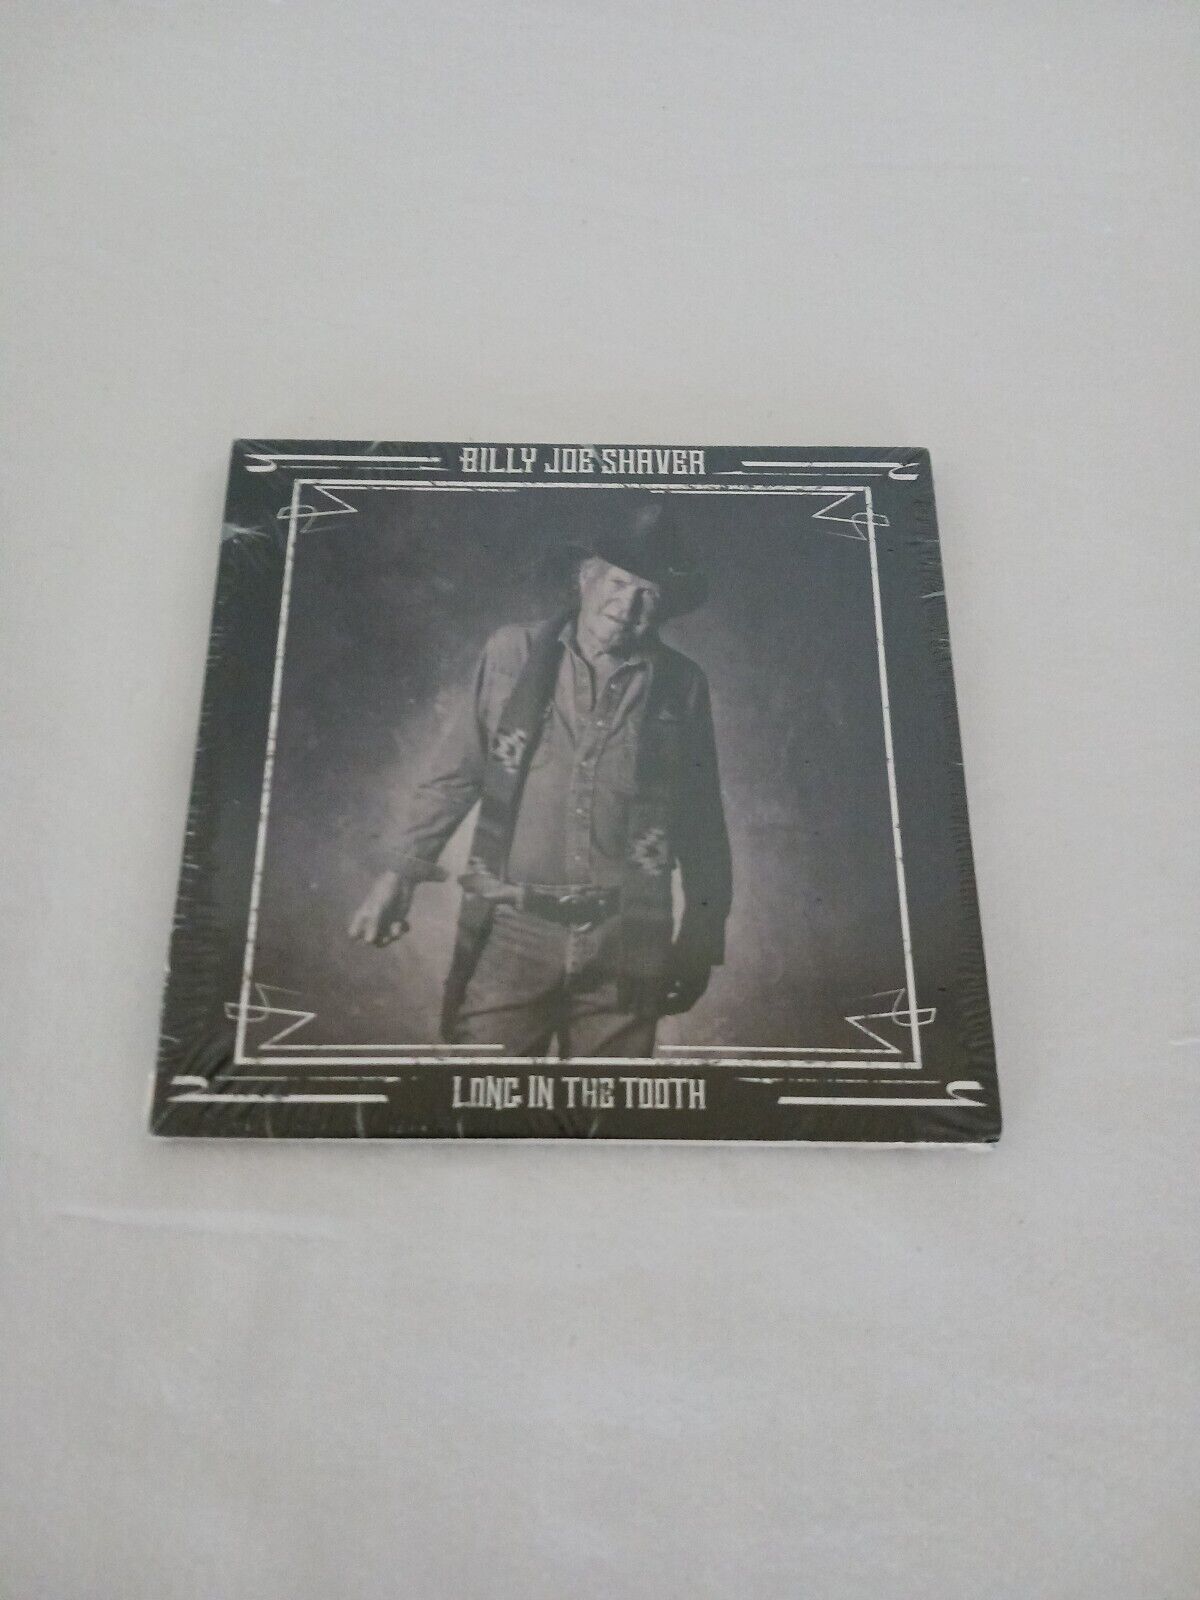 BILLY JOE SHAVER - LONG IN THE TOOTH [DIGIPAK] - NEW SEALED 